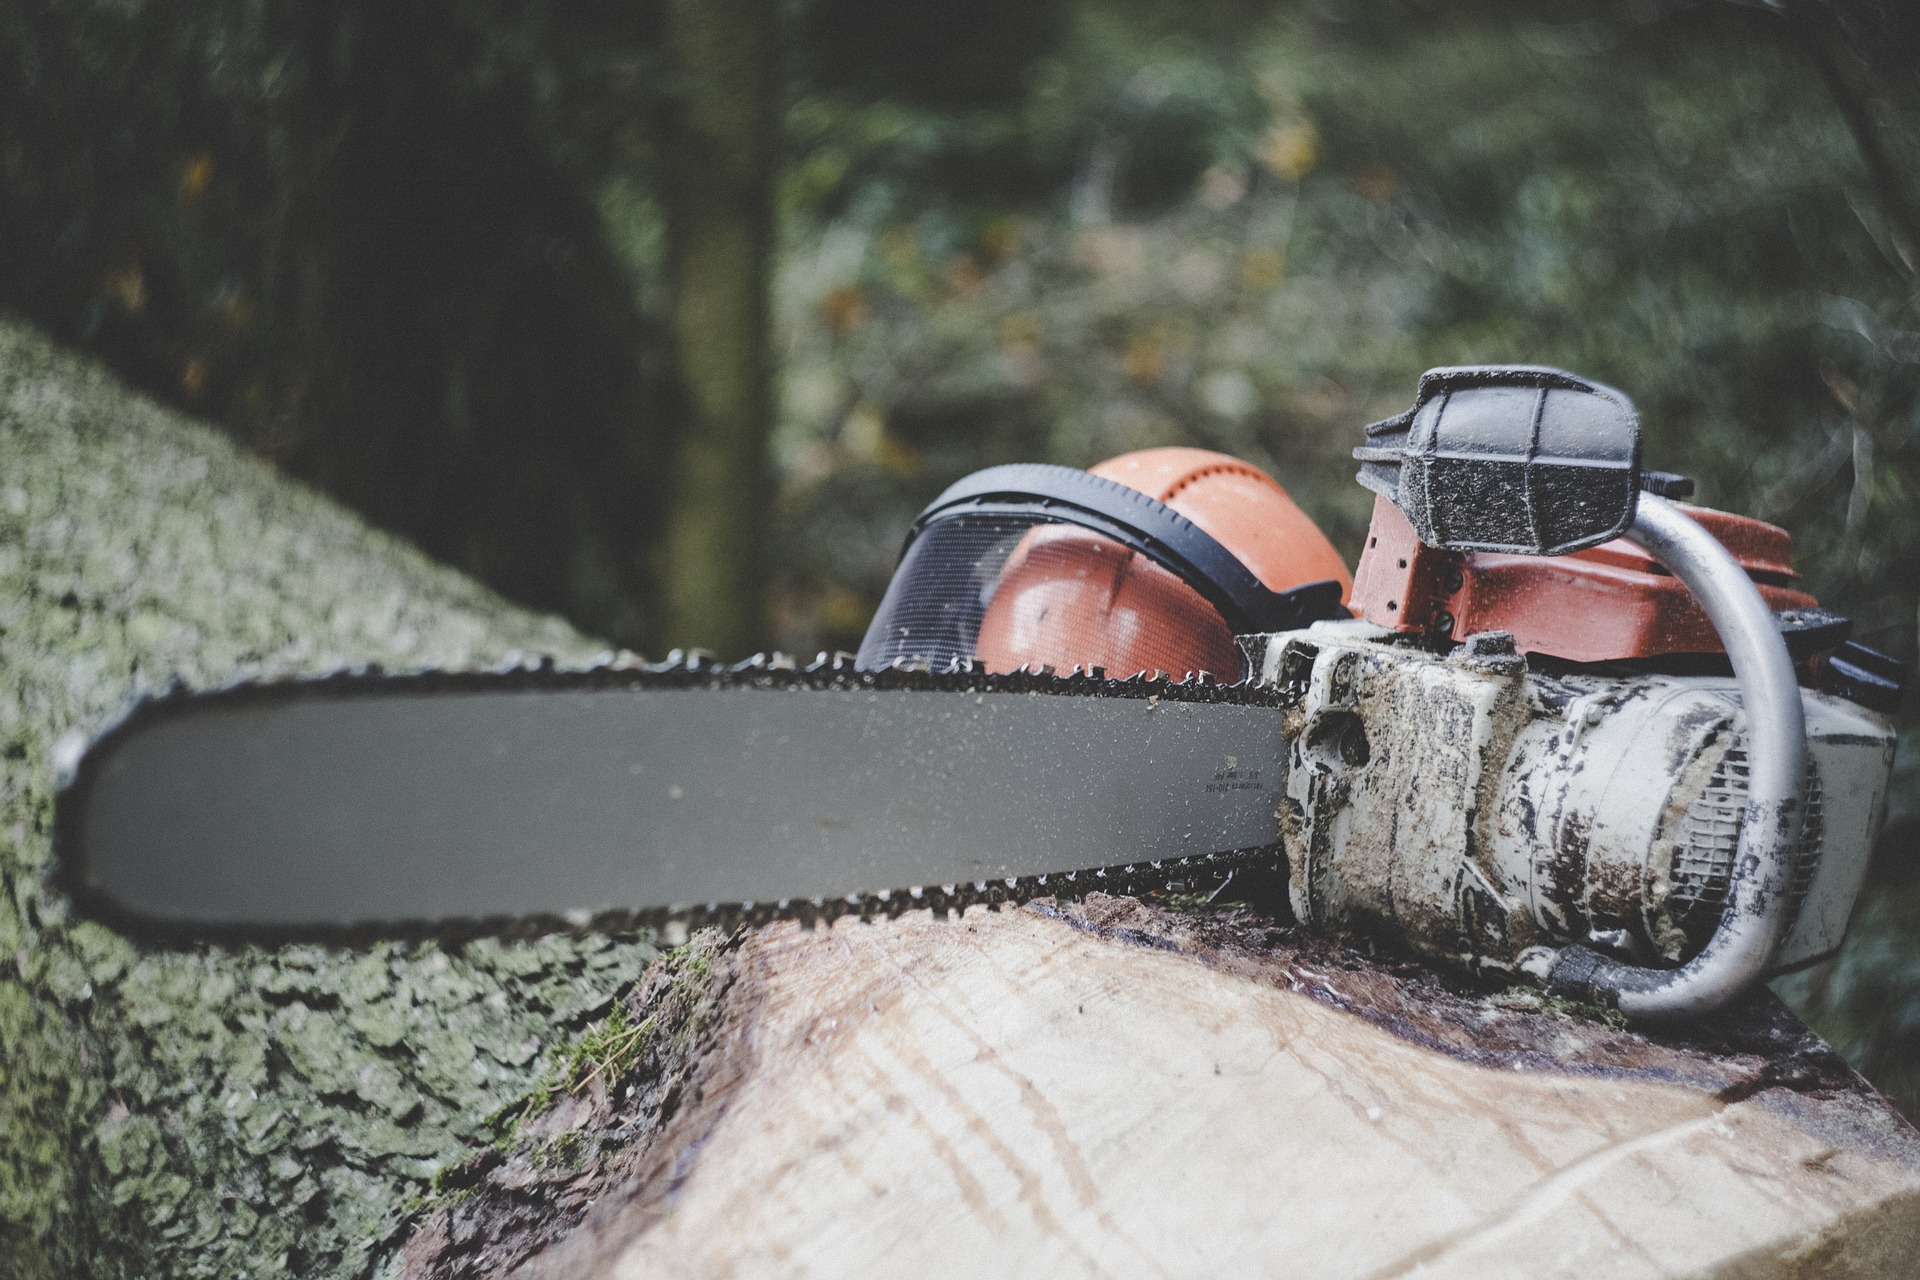 Preventing injuries by using a chainsaw